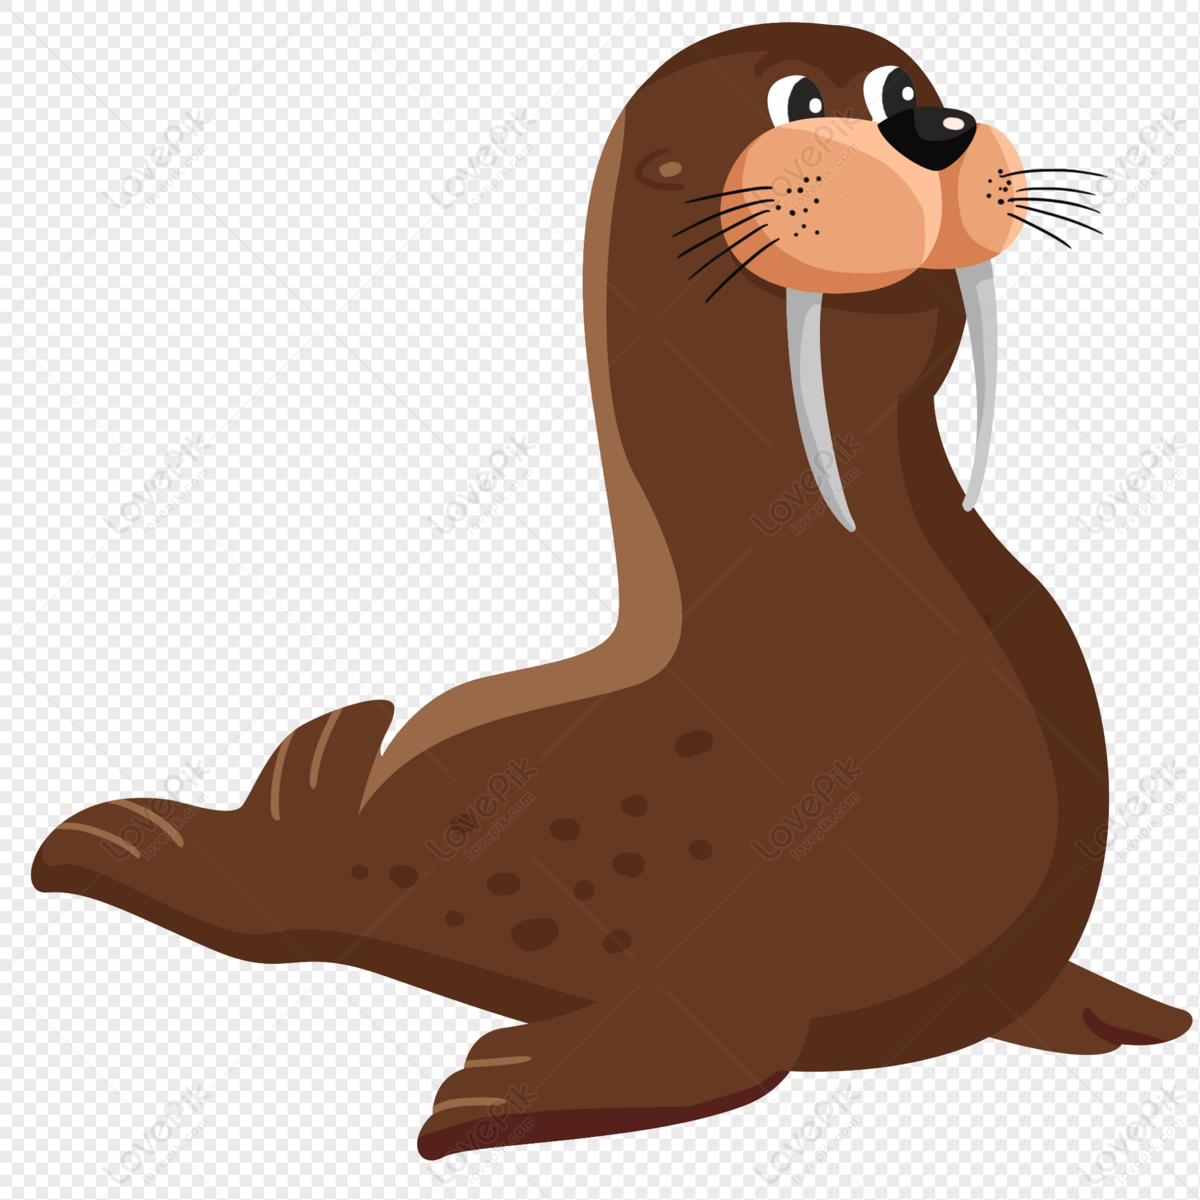 Hand Drawn Cartoon Sea Lion Seal PNG Hd Transparent Image And Clipart Image  For Free Download - Lovepik | 401280164